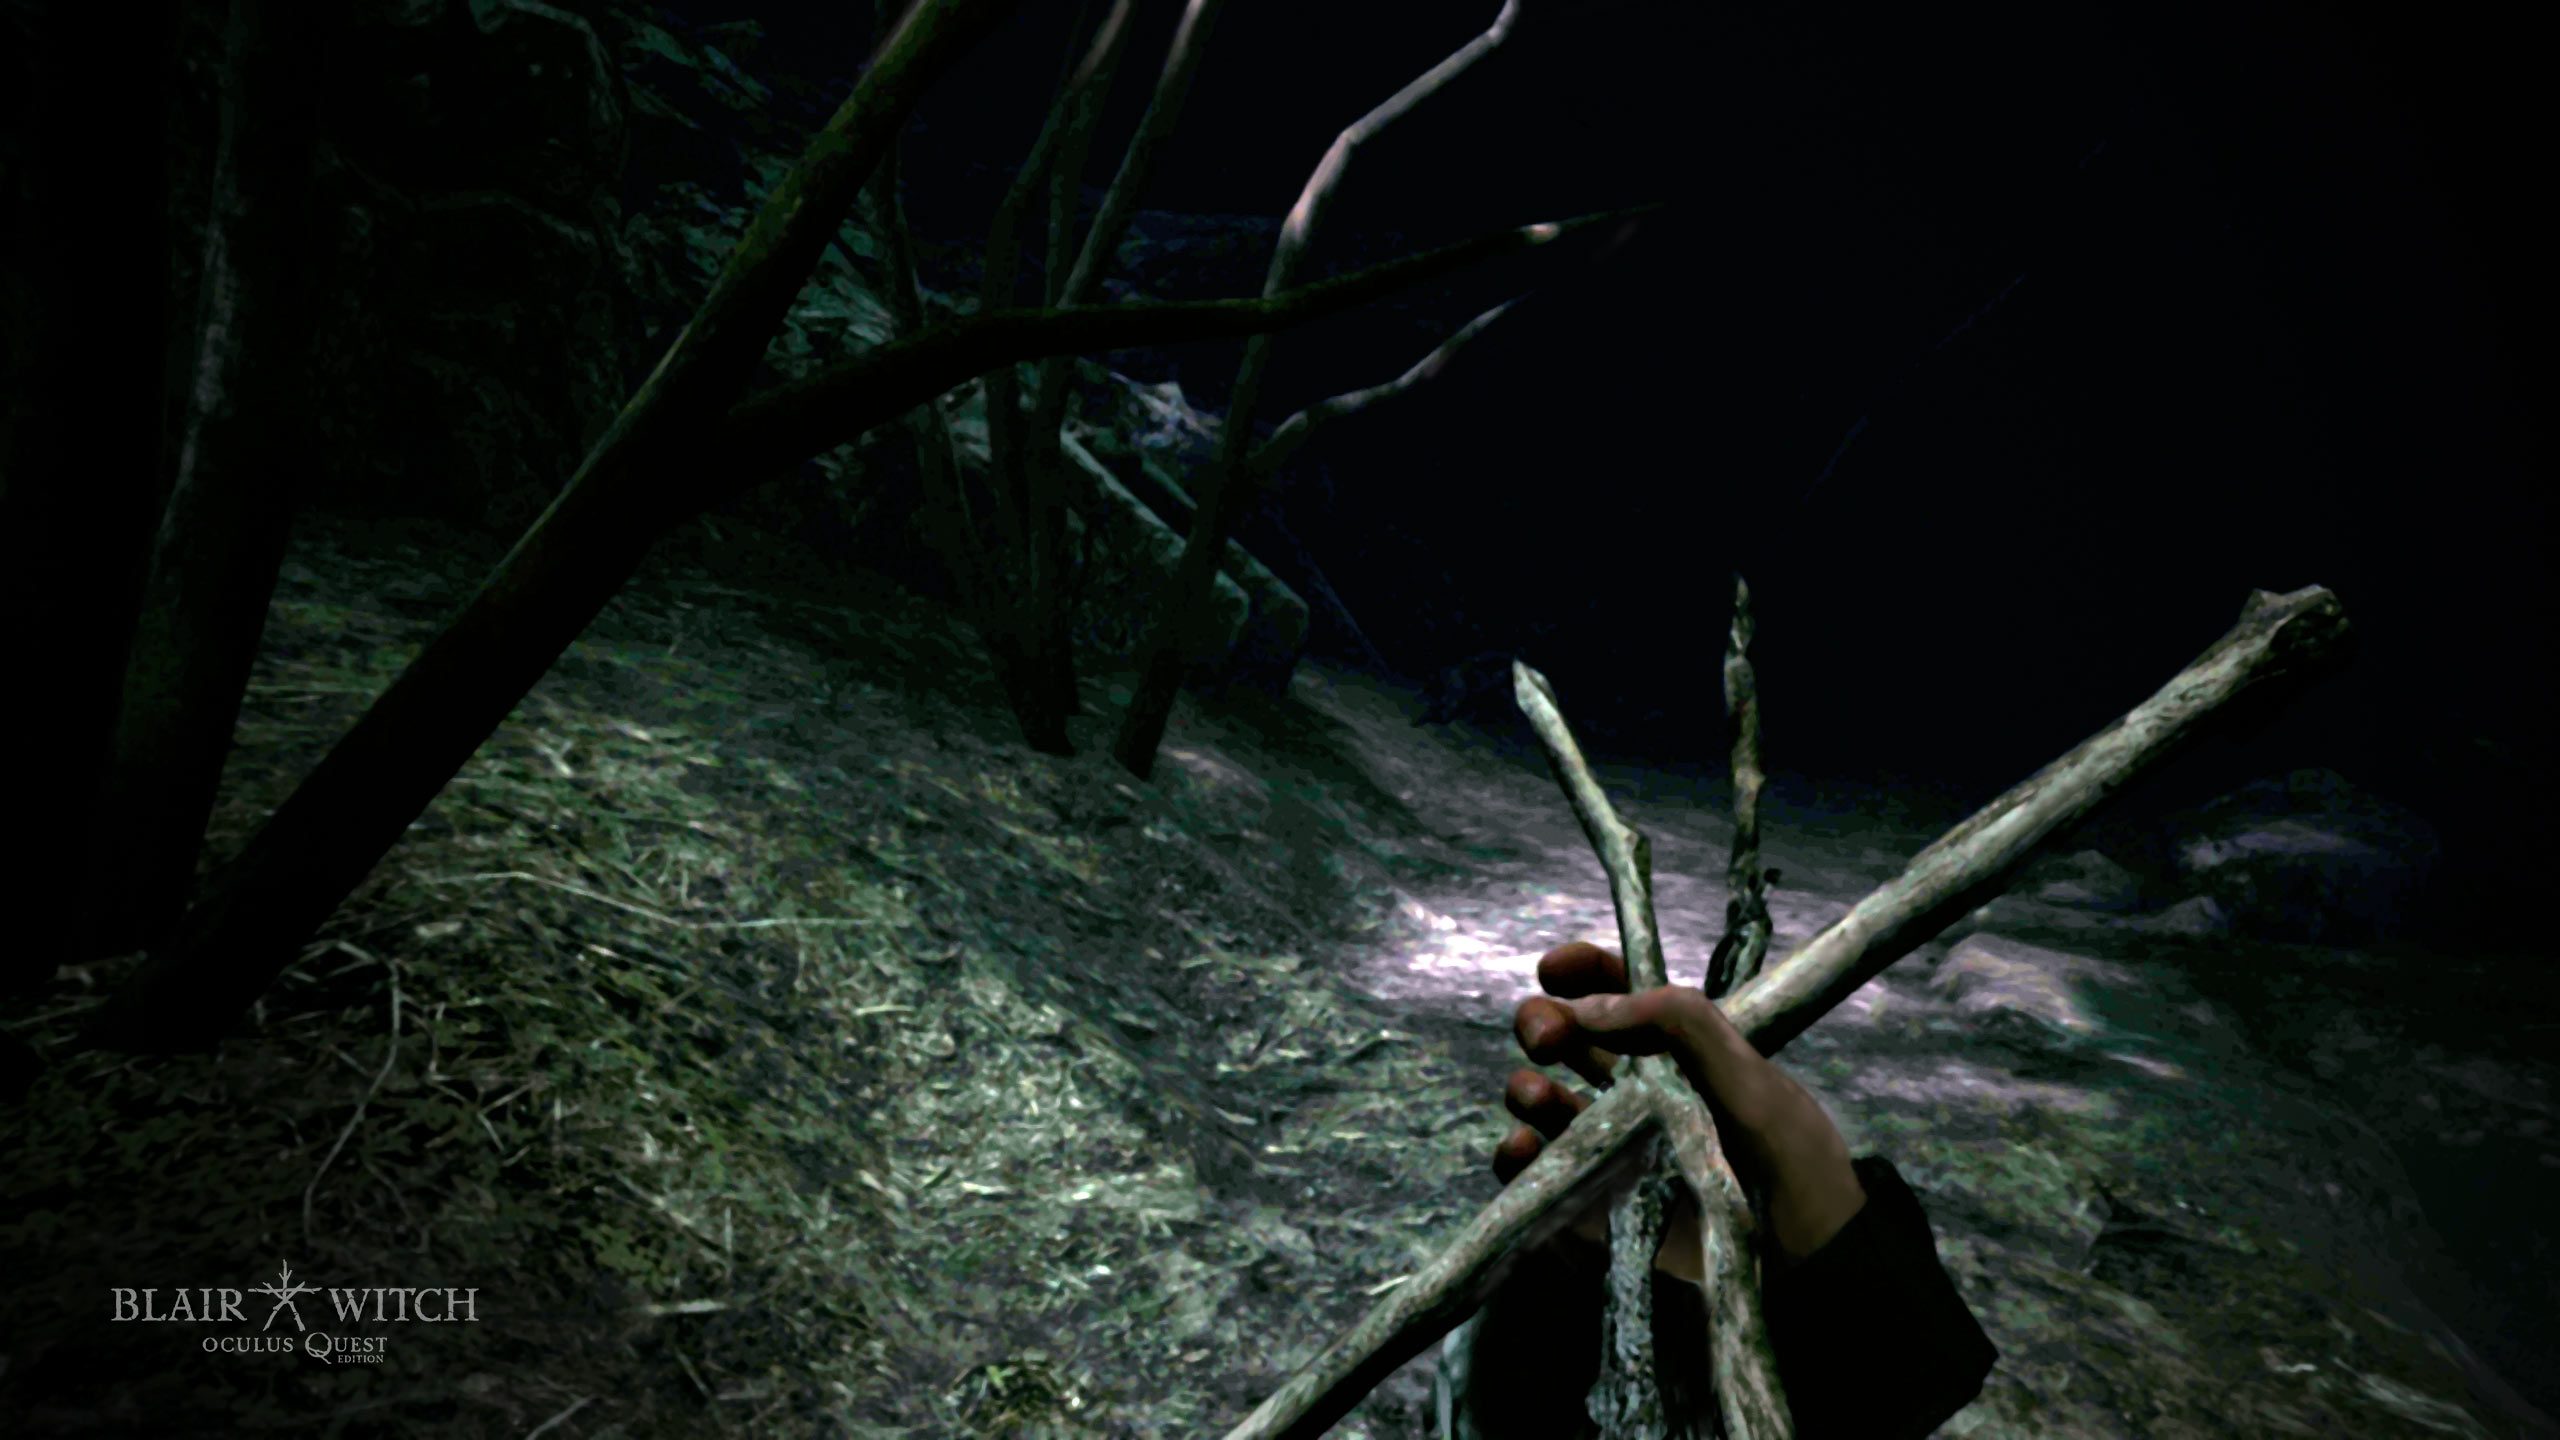  Blair Witch PS4 : Video Games